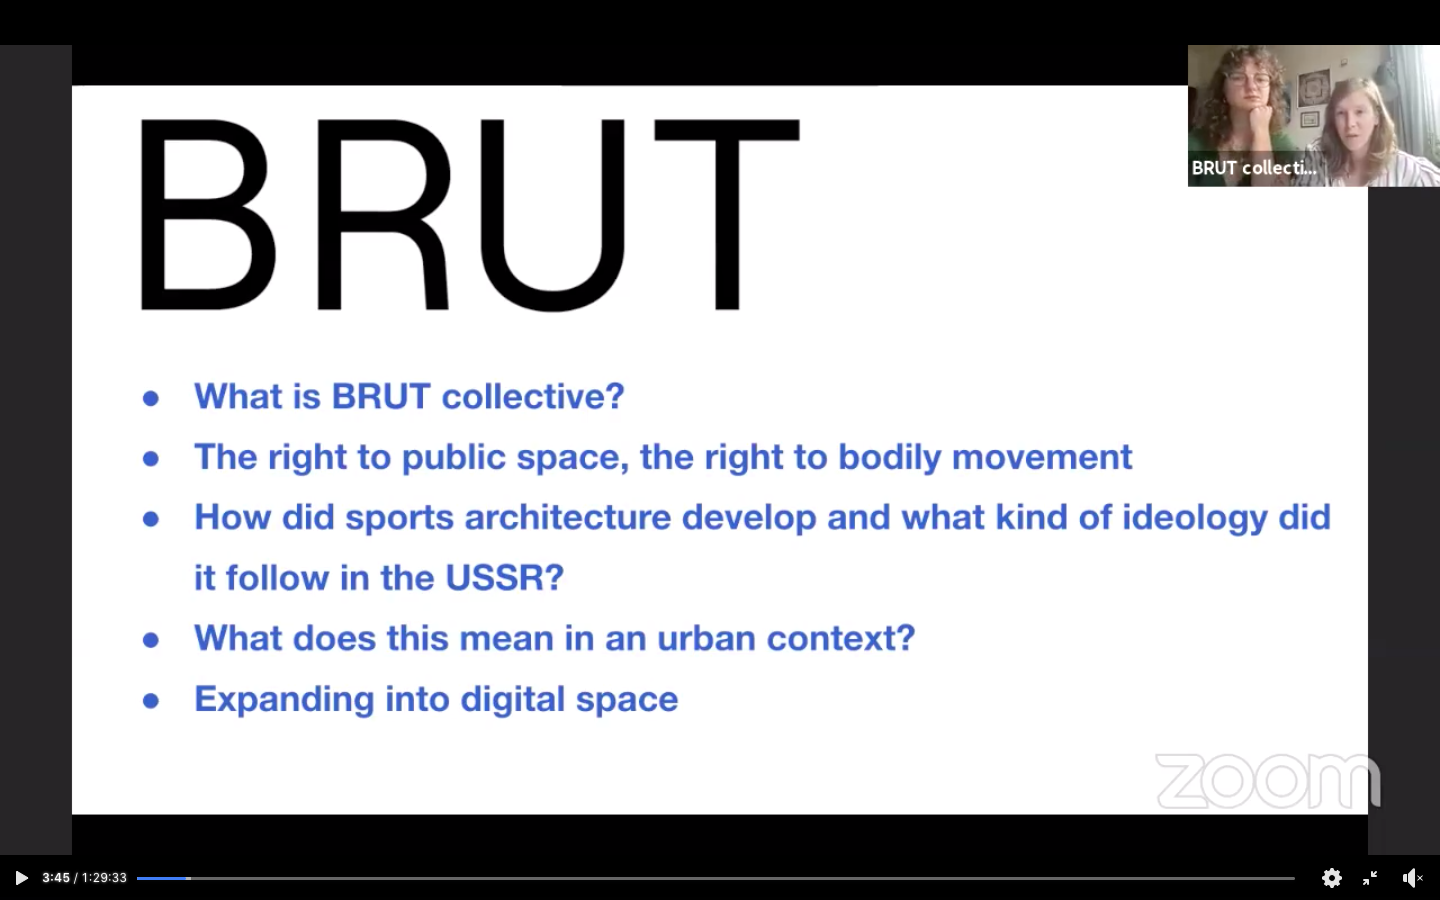 BRUT
What is BRUT collective?
The right to public space, the right to bodily movement
How did sports architecture develop and what kind of ideology did it follow in the USSR?
What does this mean in an urban context?
Expanding into digital space